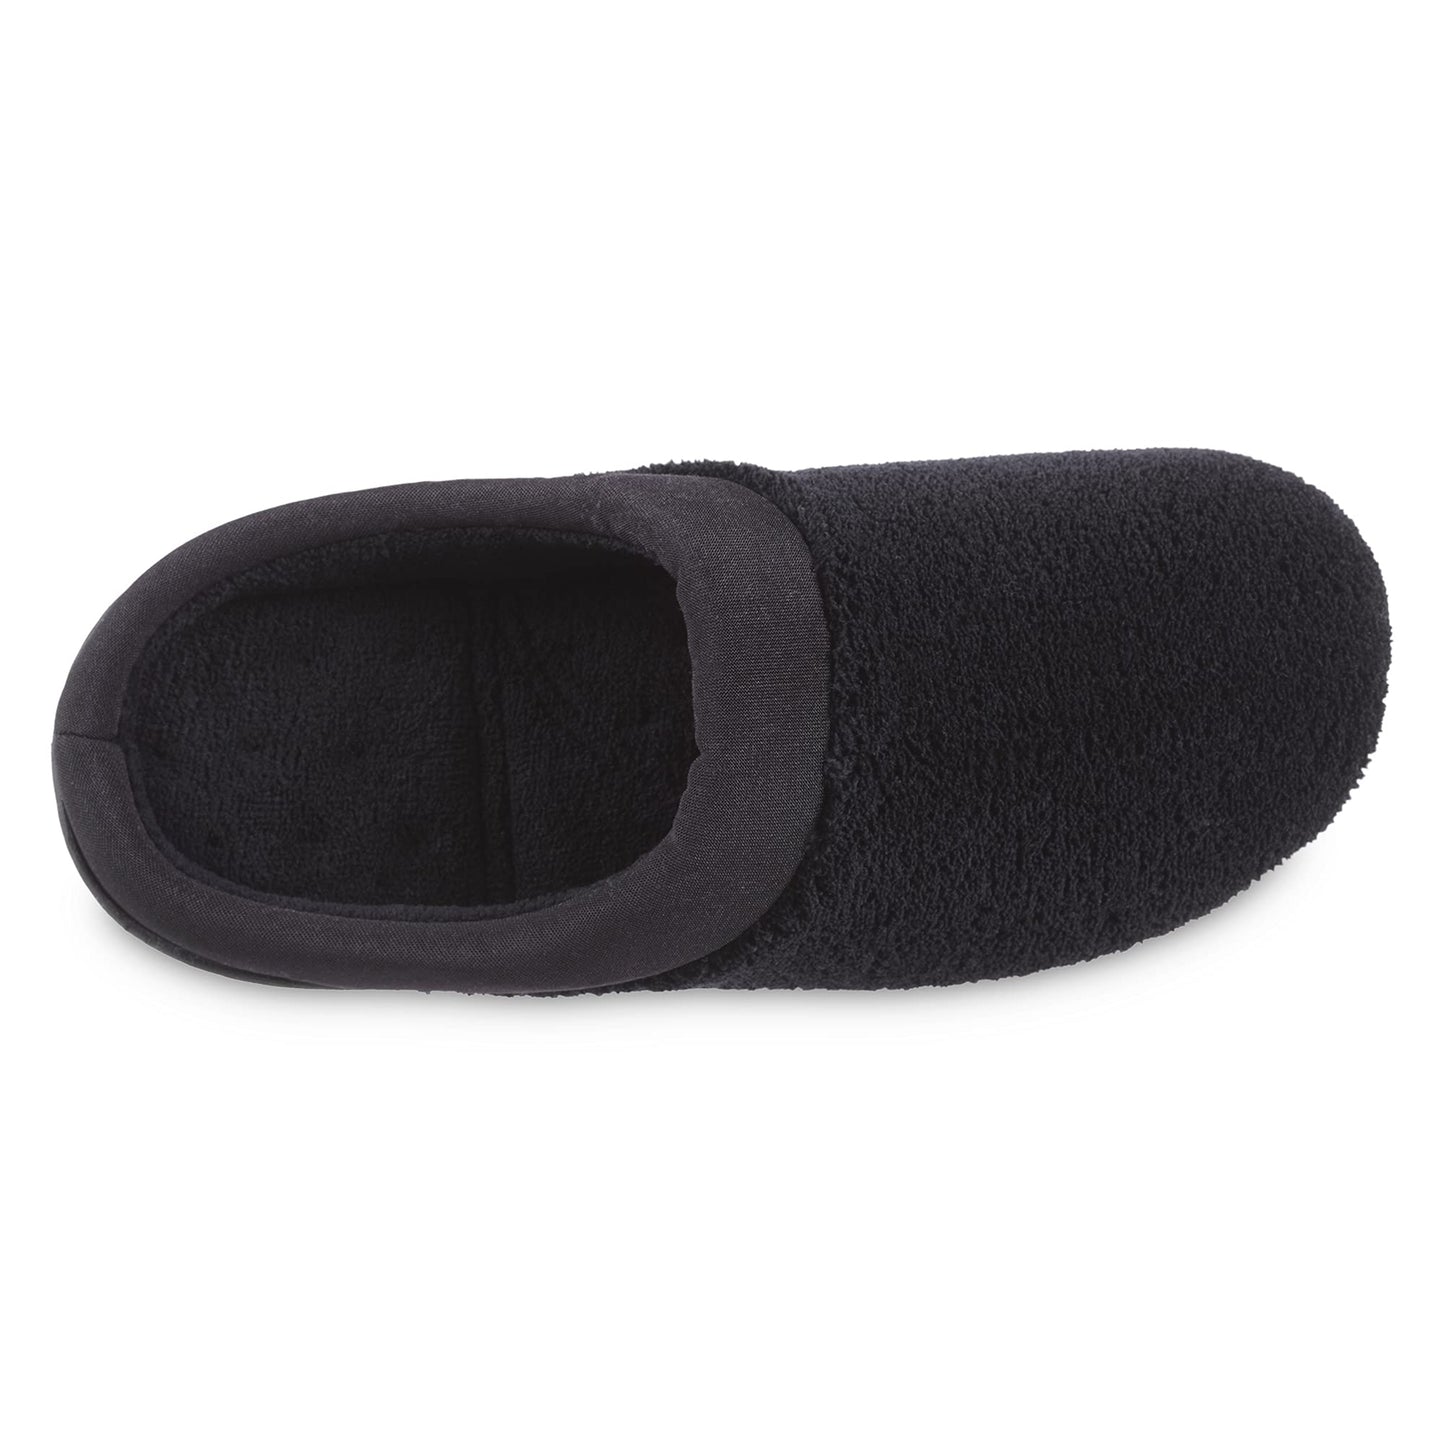 Women's Terry and Satin Slip on Cushioned Slipper with Memory Foam for Indoor